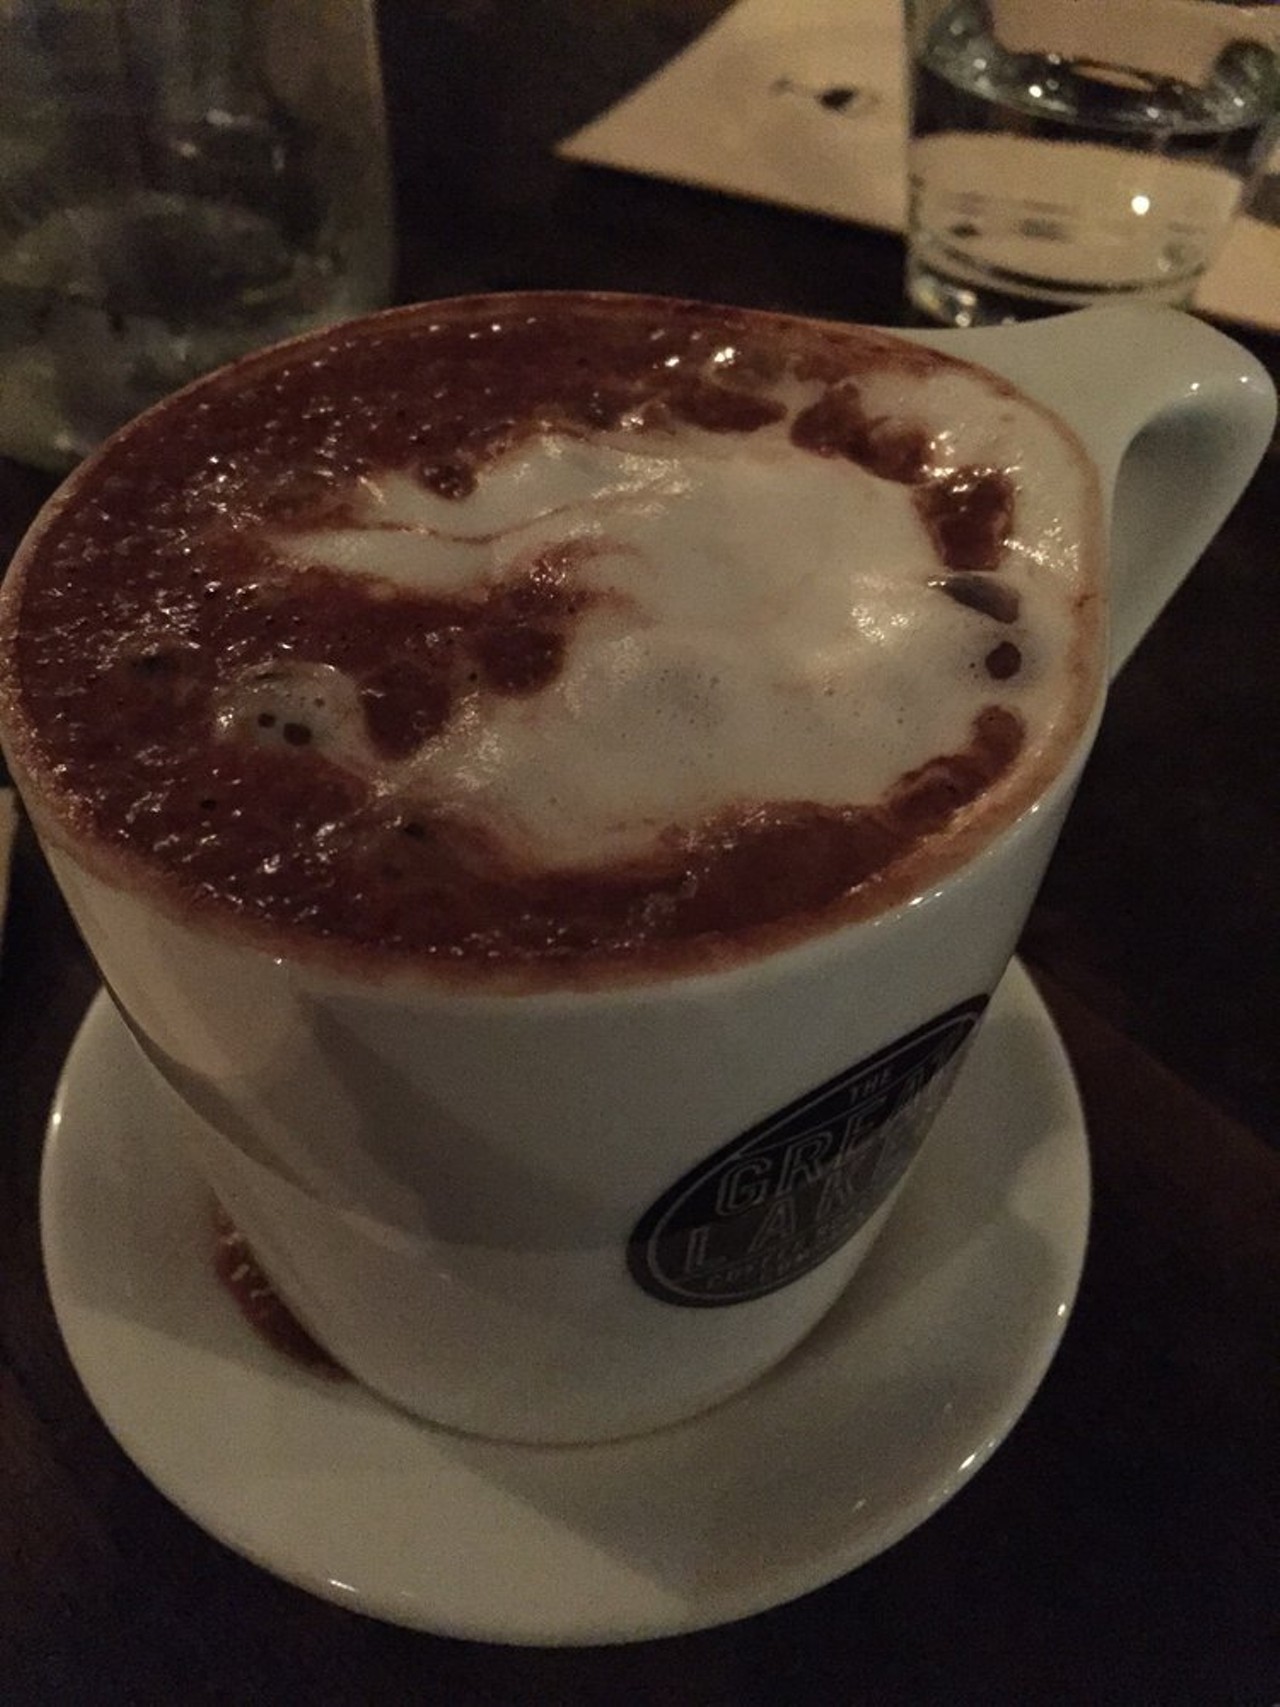 Great Lakes Coffee Roasting Company - 3965 Woodward Ave., Detroit;  313-831-9627 - The best part about a hot chocolate at this Midtown coffee shop is that you can ask them to pour a little shot of sum&#146;in-sum&#146;in in there too. (Photo via Yelp user Annette J)